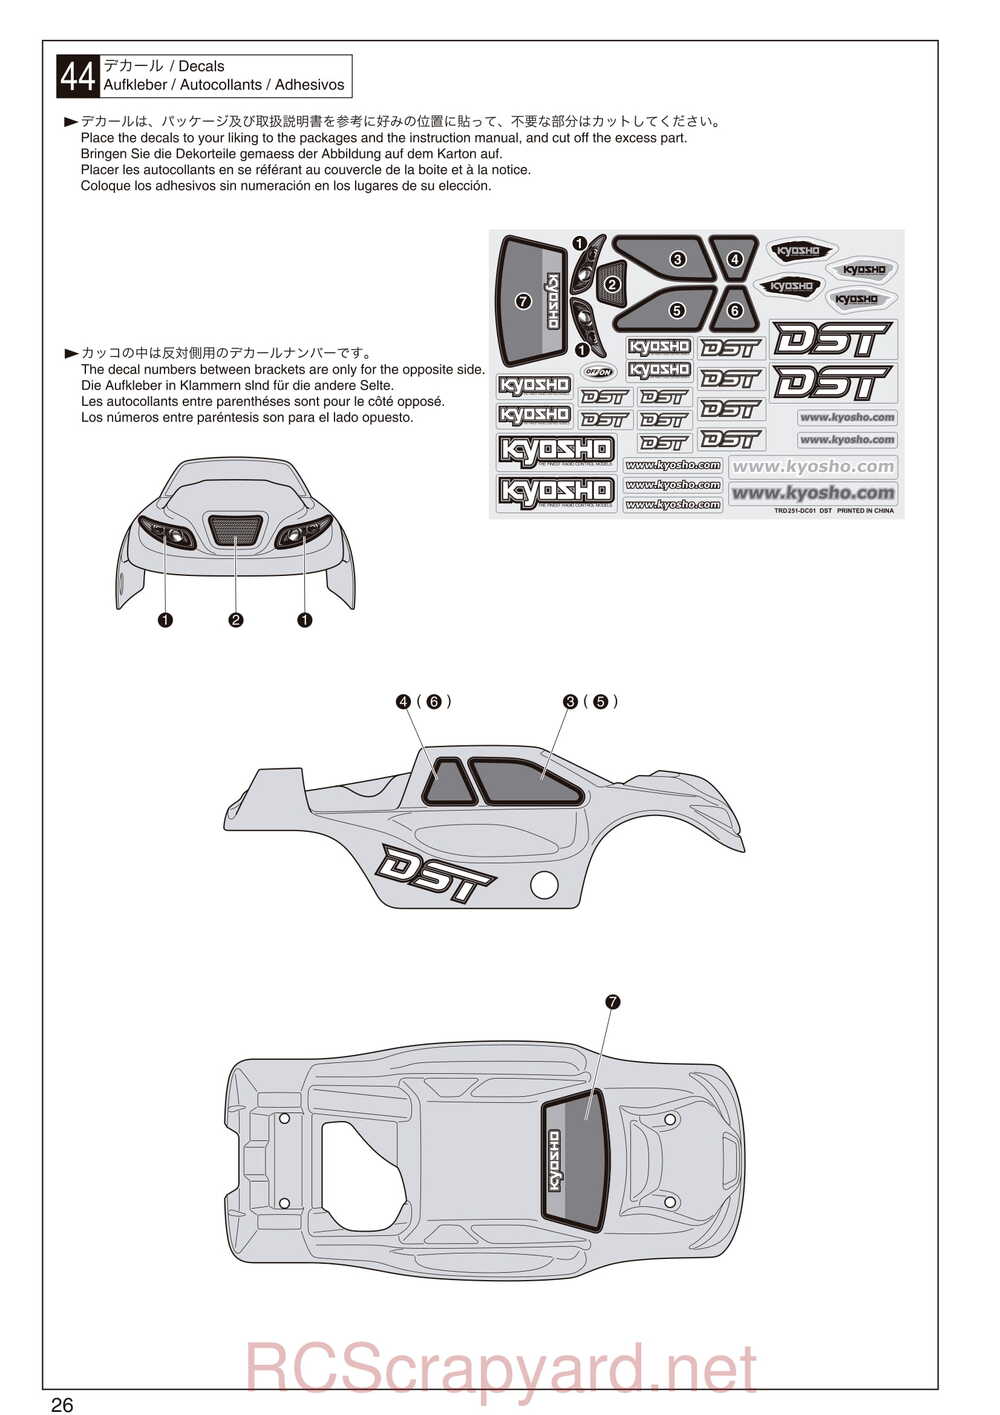 Kyosho - 31097 - DST - Manual - Page 26